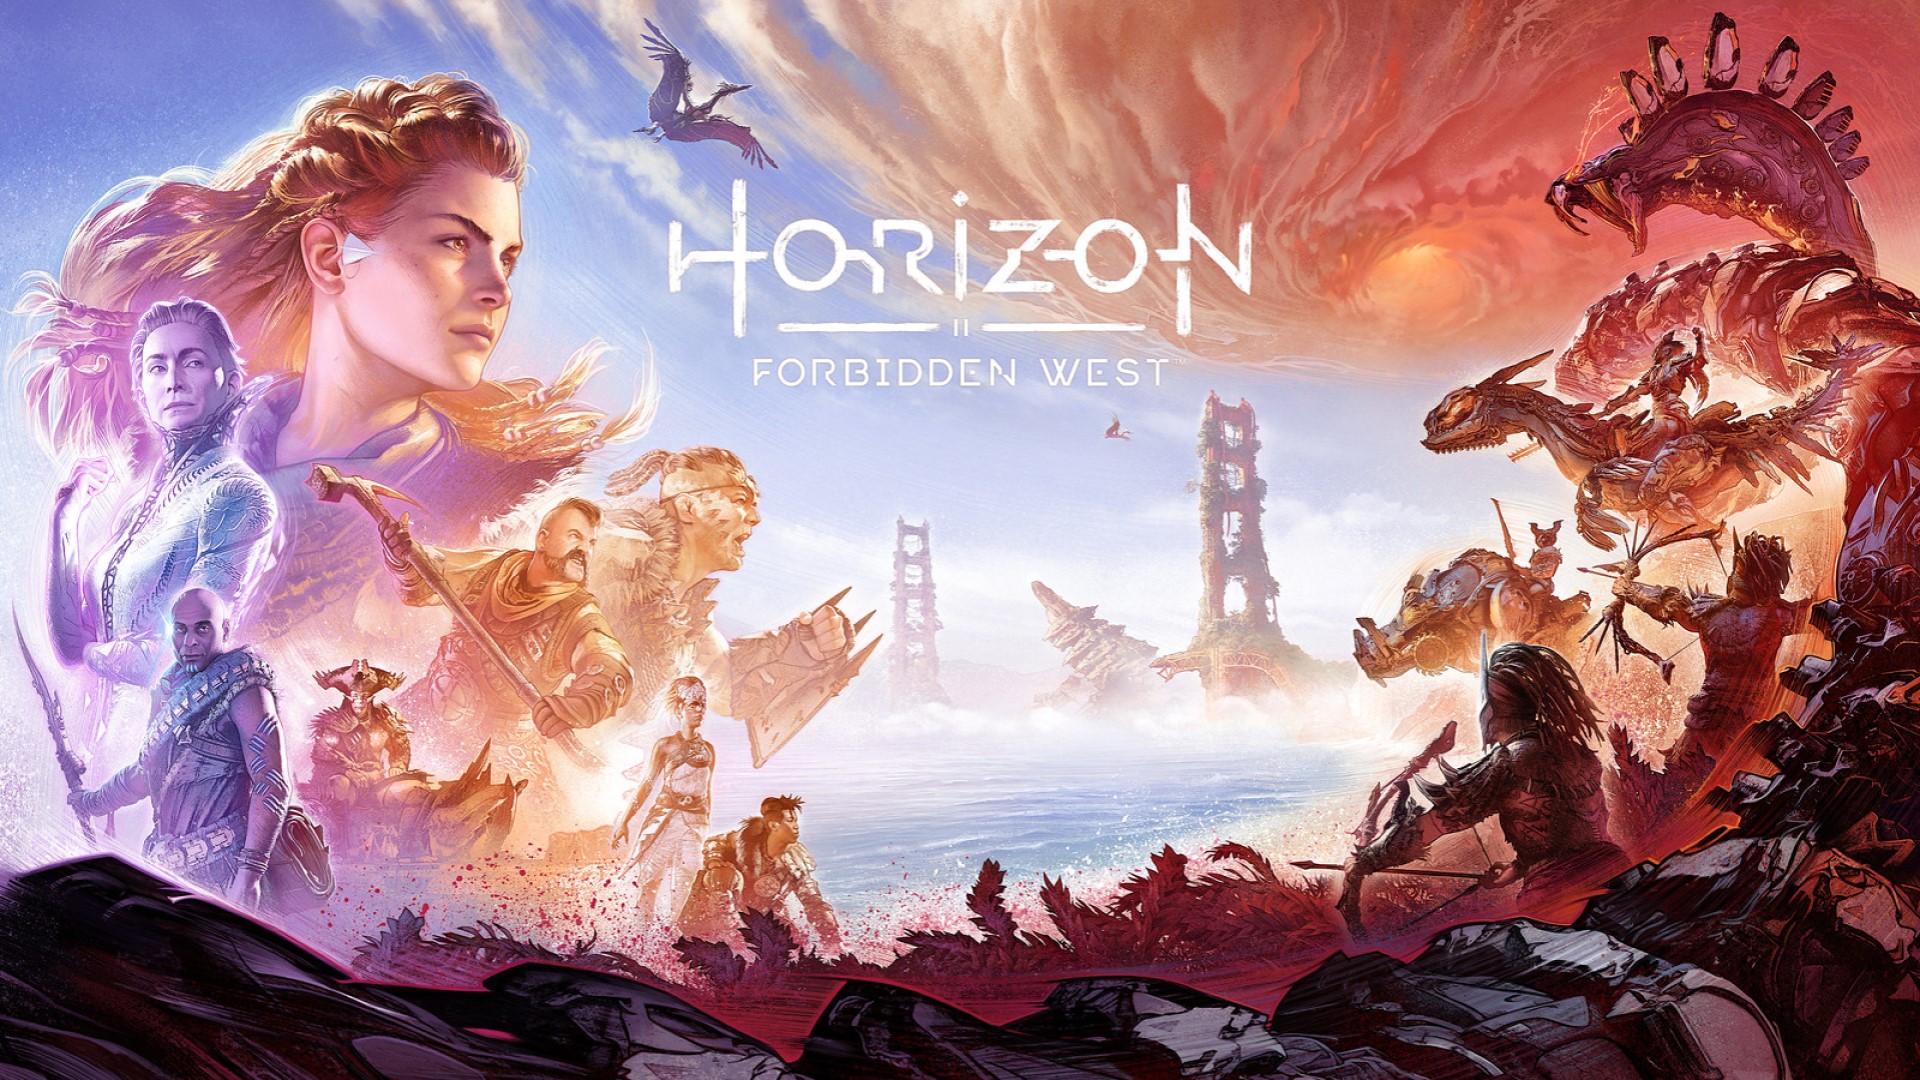 Horizon Forbidden West Story Trailer Teases Mysteries Conflicts